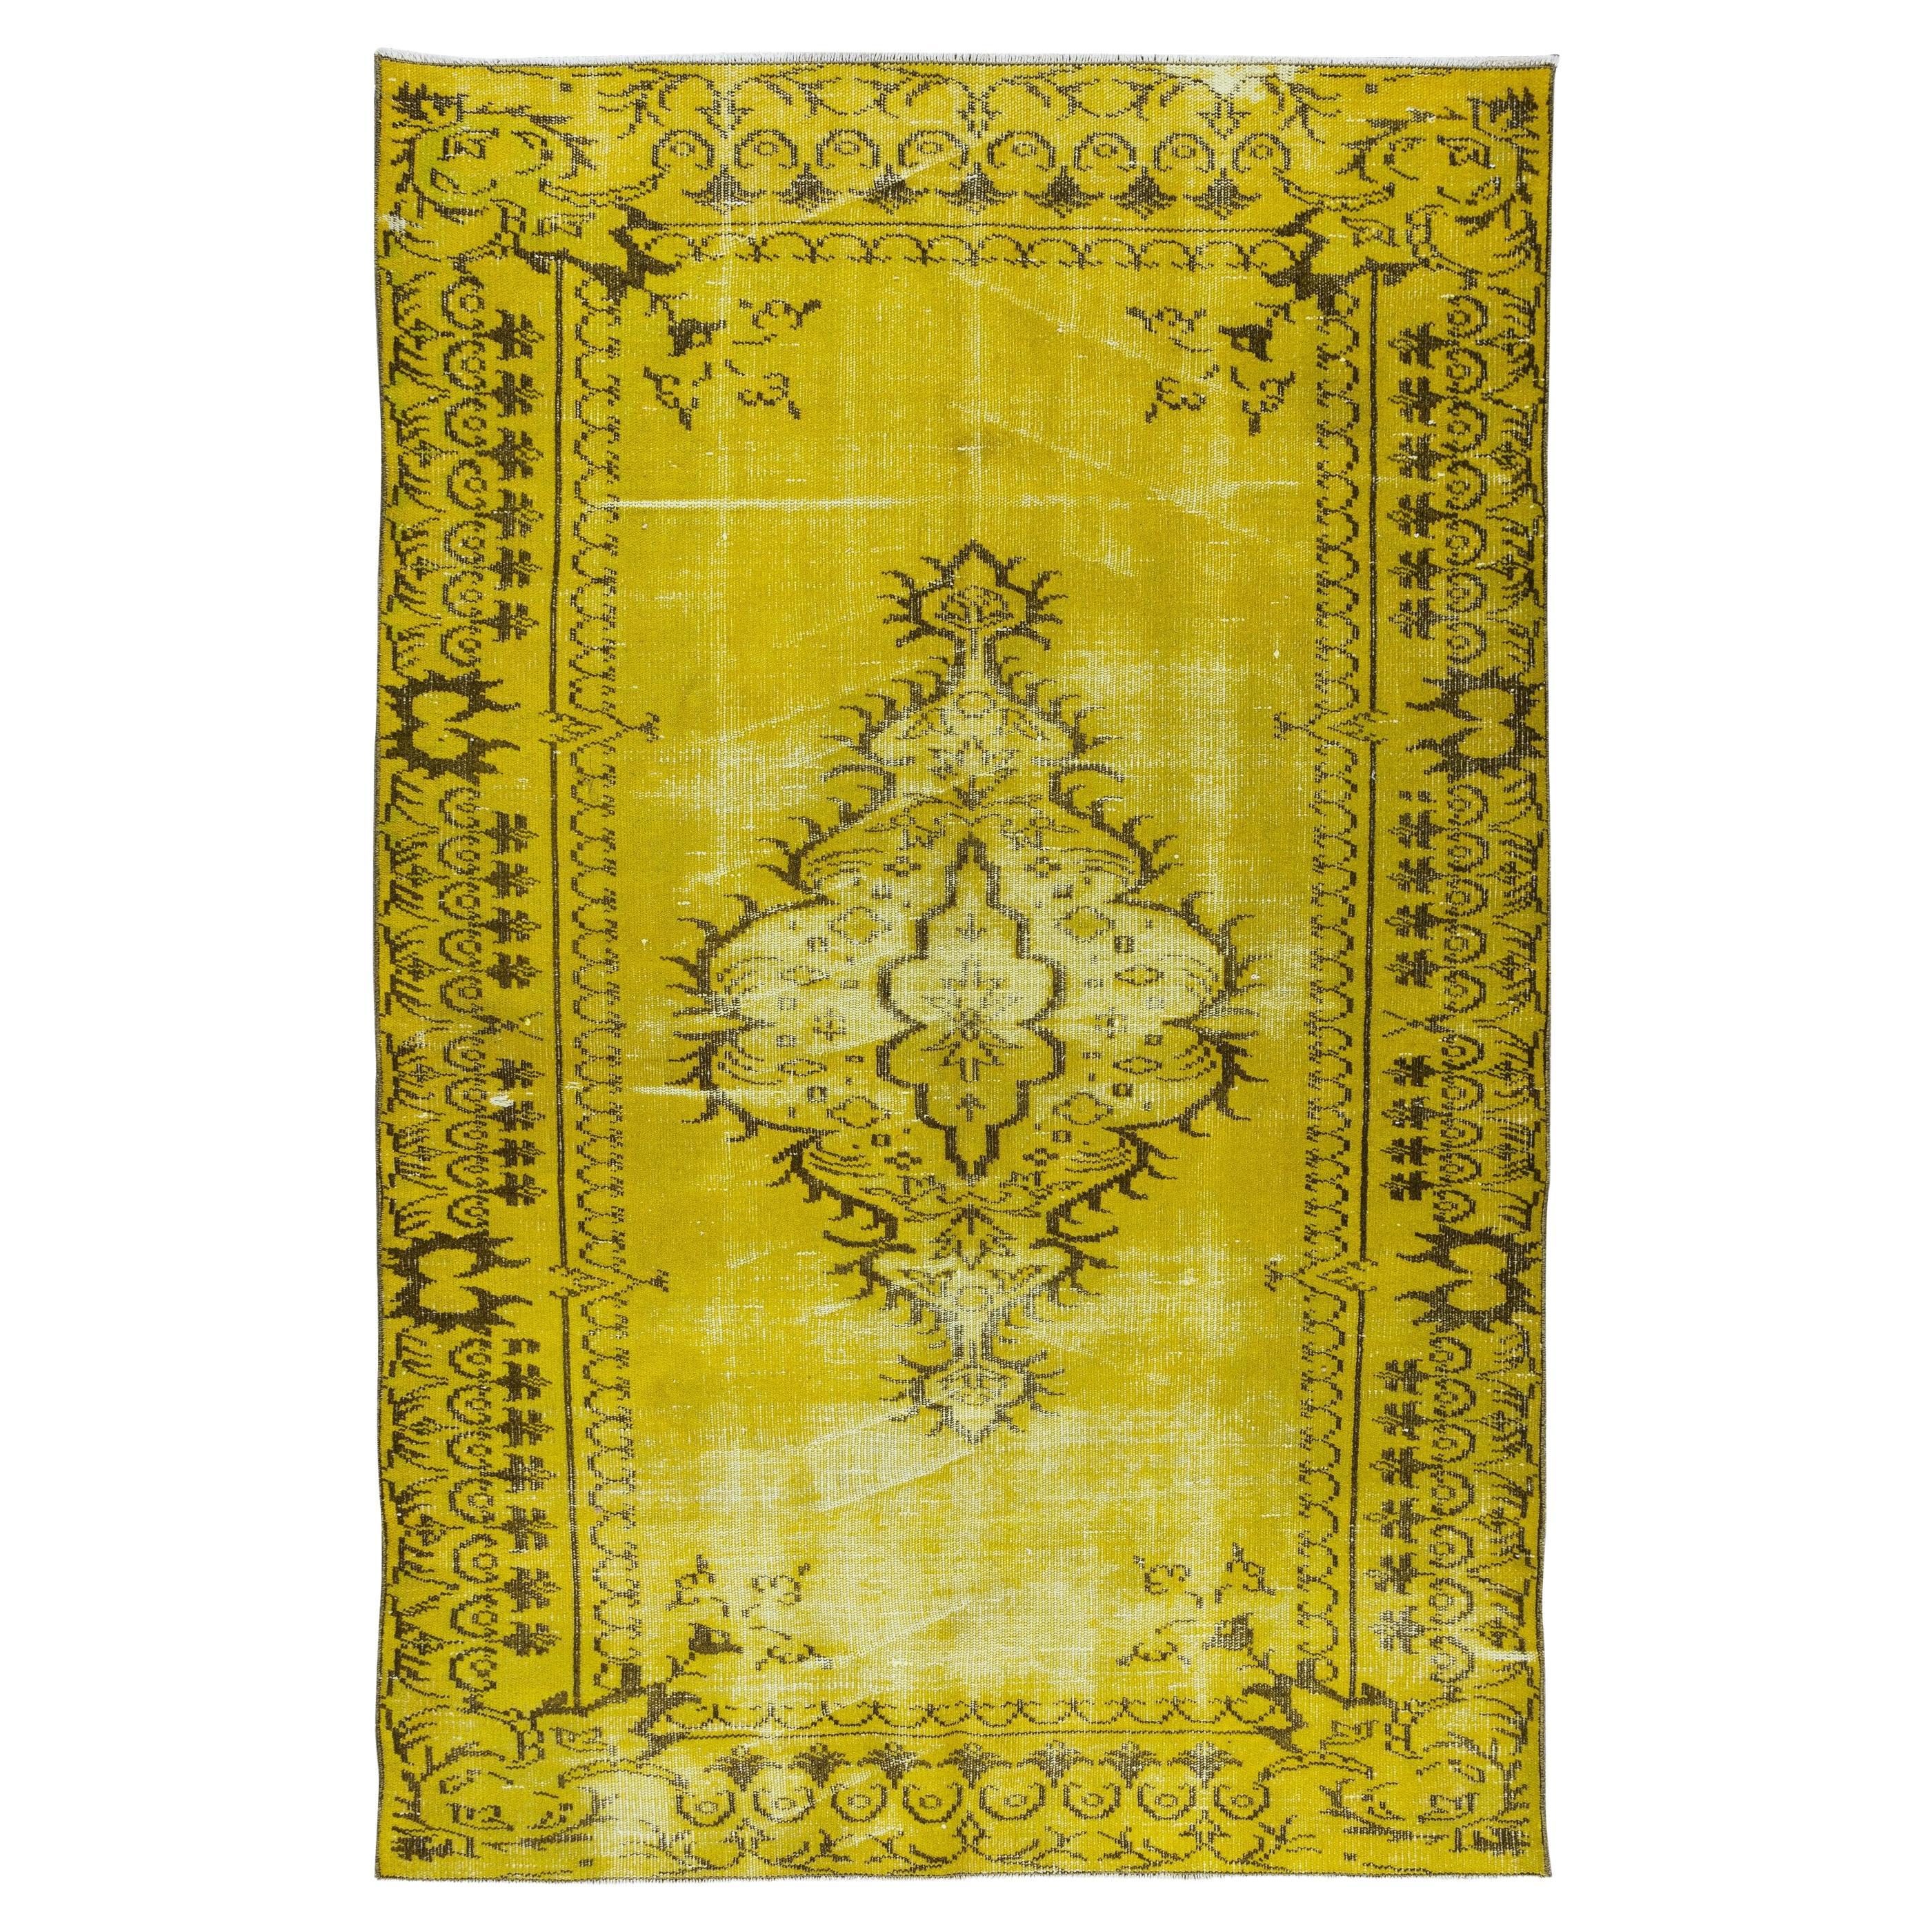 5.2x8.3 Ft Vintage Handmade Turkish Rug Overdyed in Yellow with Medallion Design For Sale